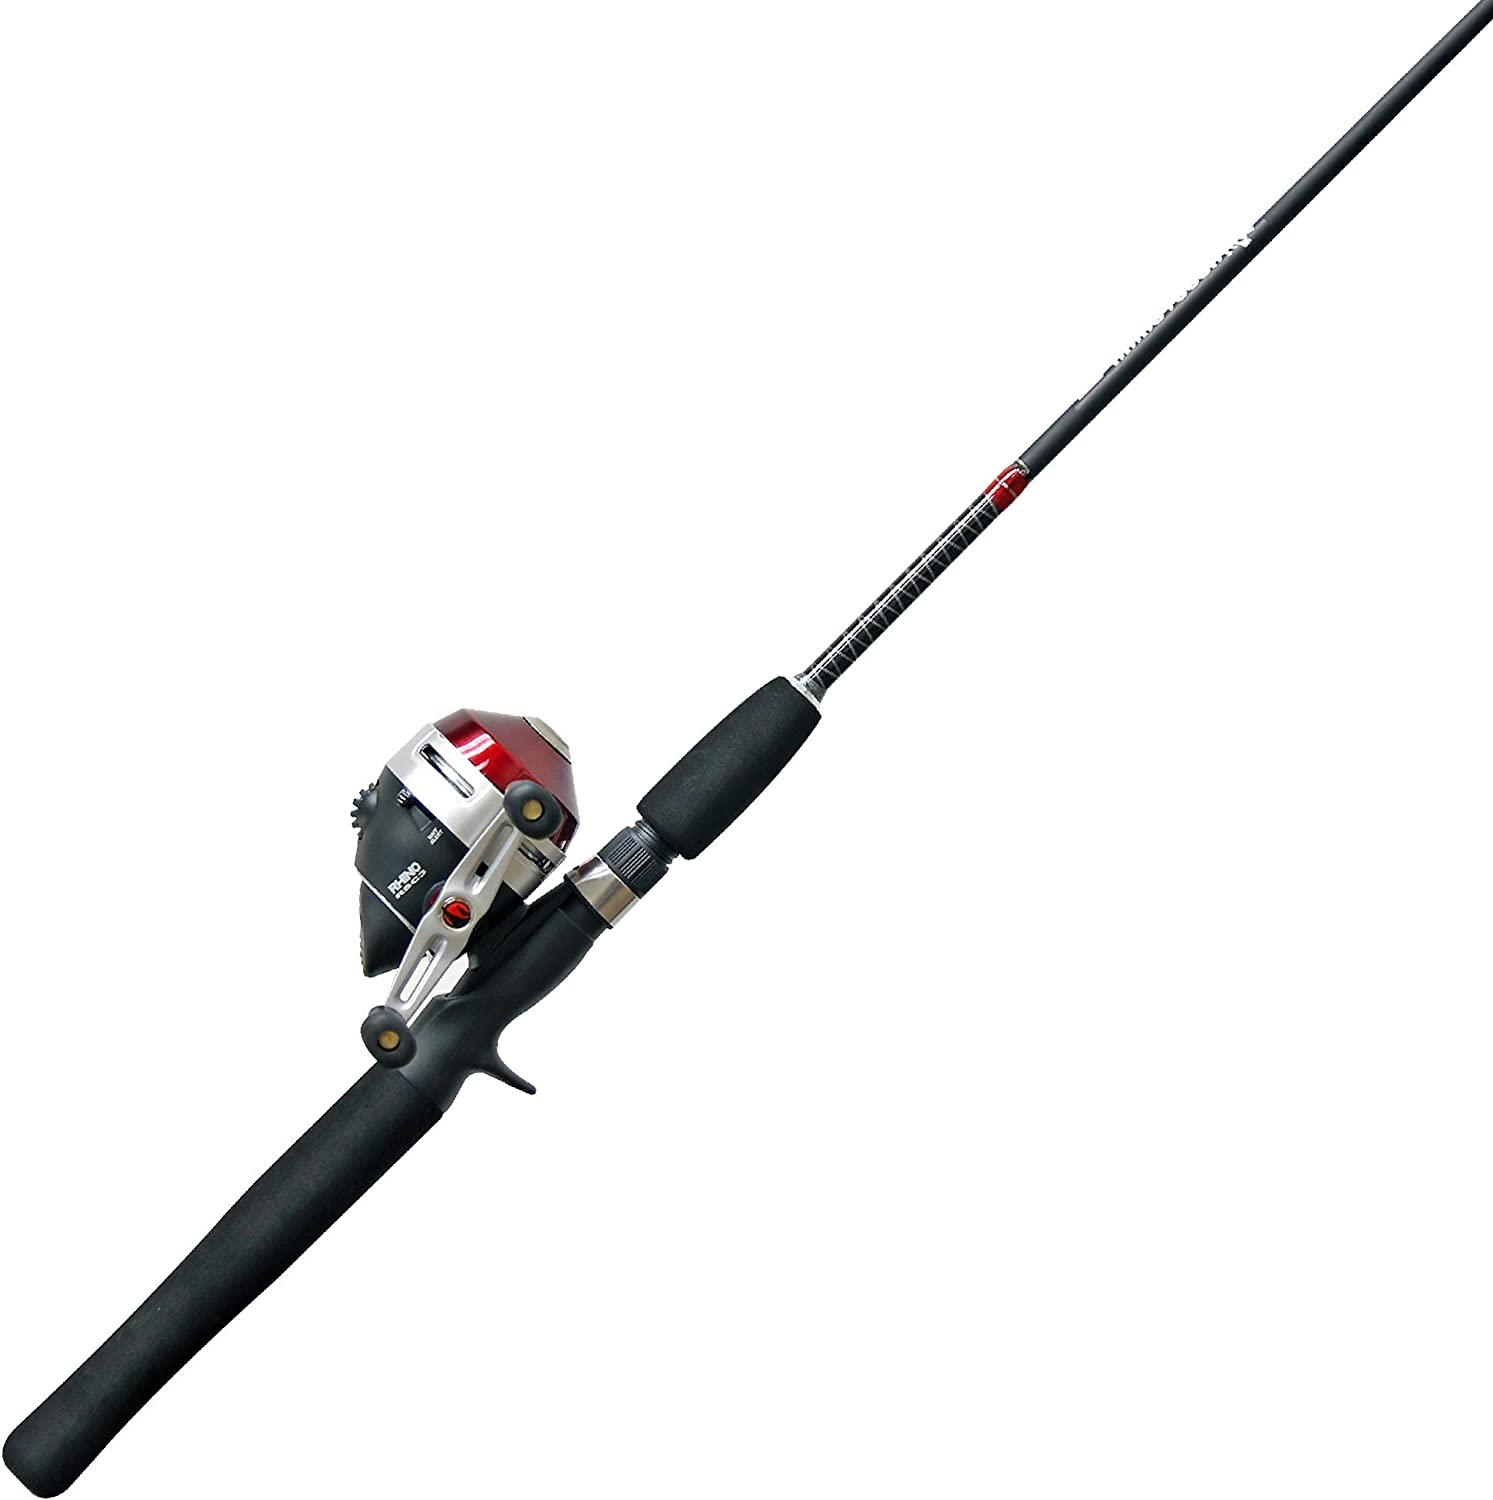 11. Zebco Rhino Combo - Best Zebco Combo For River Fishing